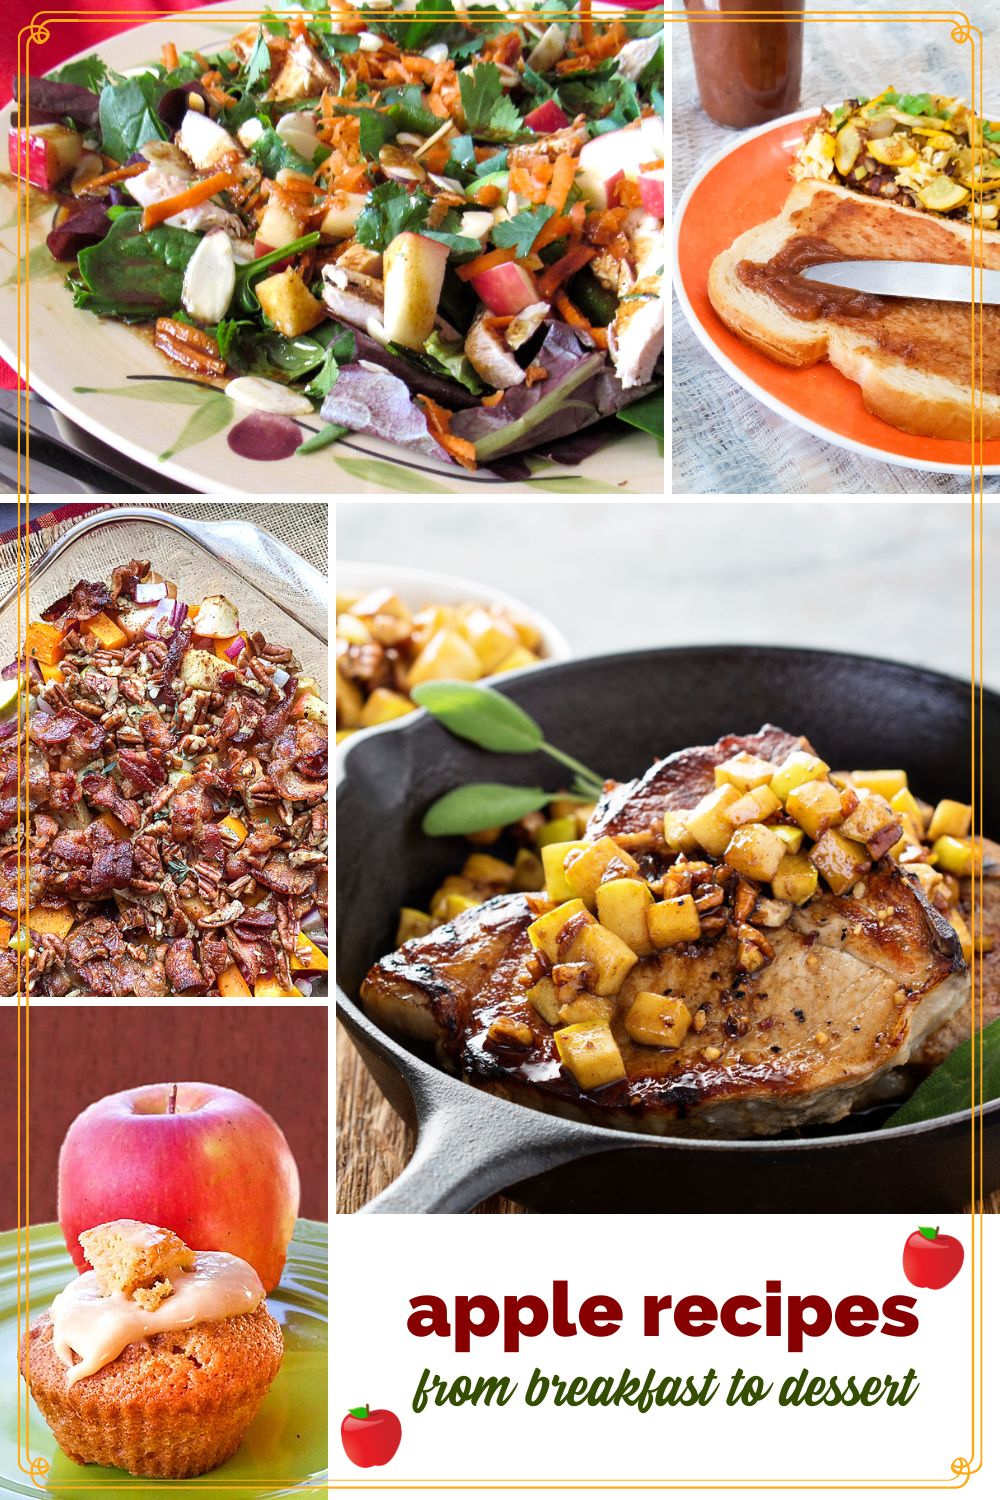 collage of apple recipes with text overlay "apple recipes from breakfast to dessert"